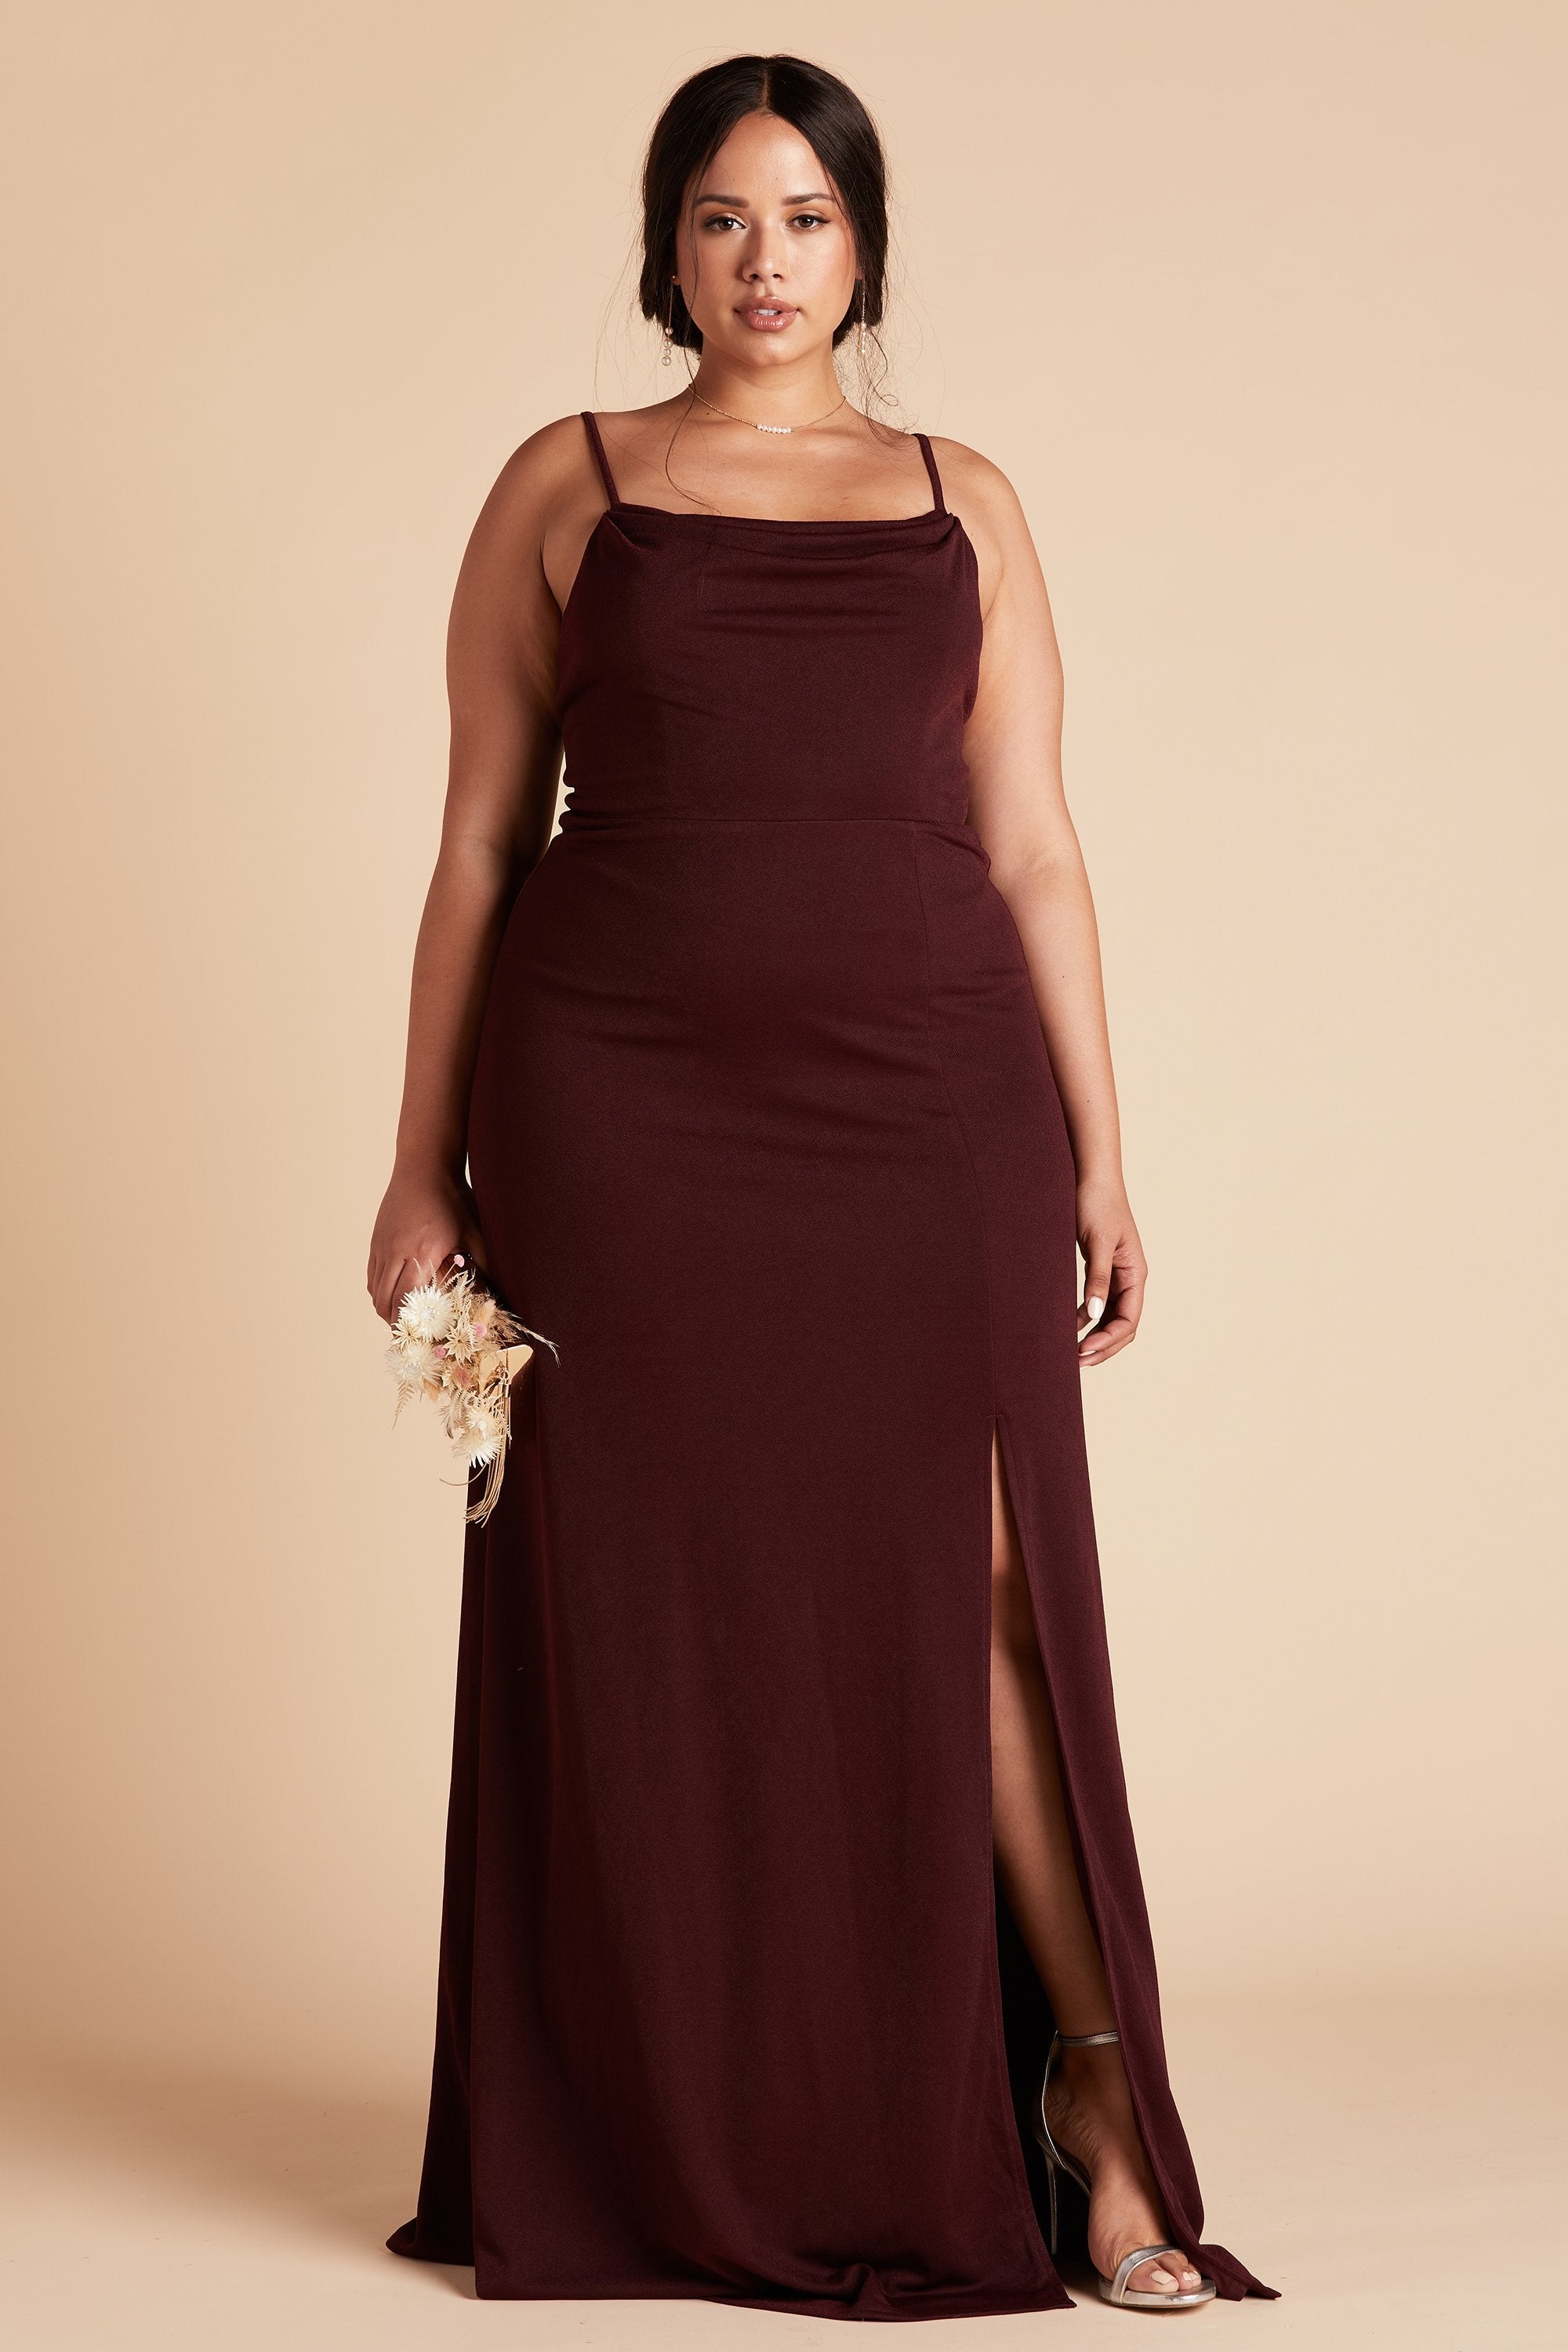 Ash plus size bridesmaid dress with slit in cabernet burgundy crepe by Birdy Grey, front view